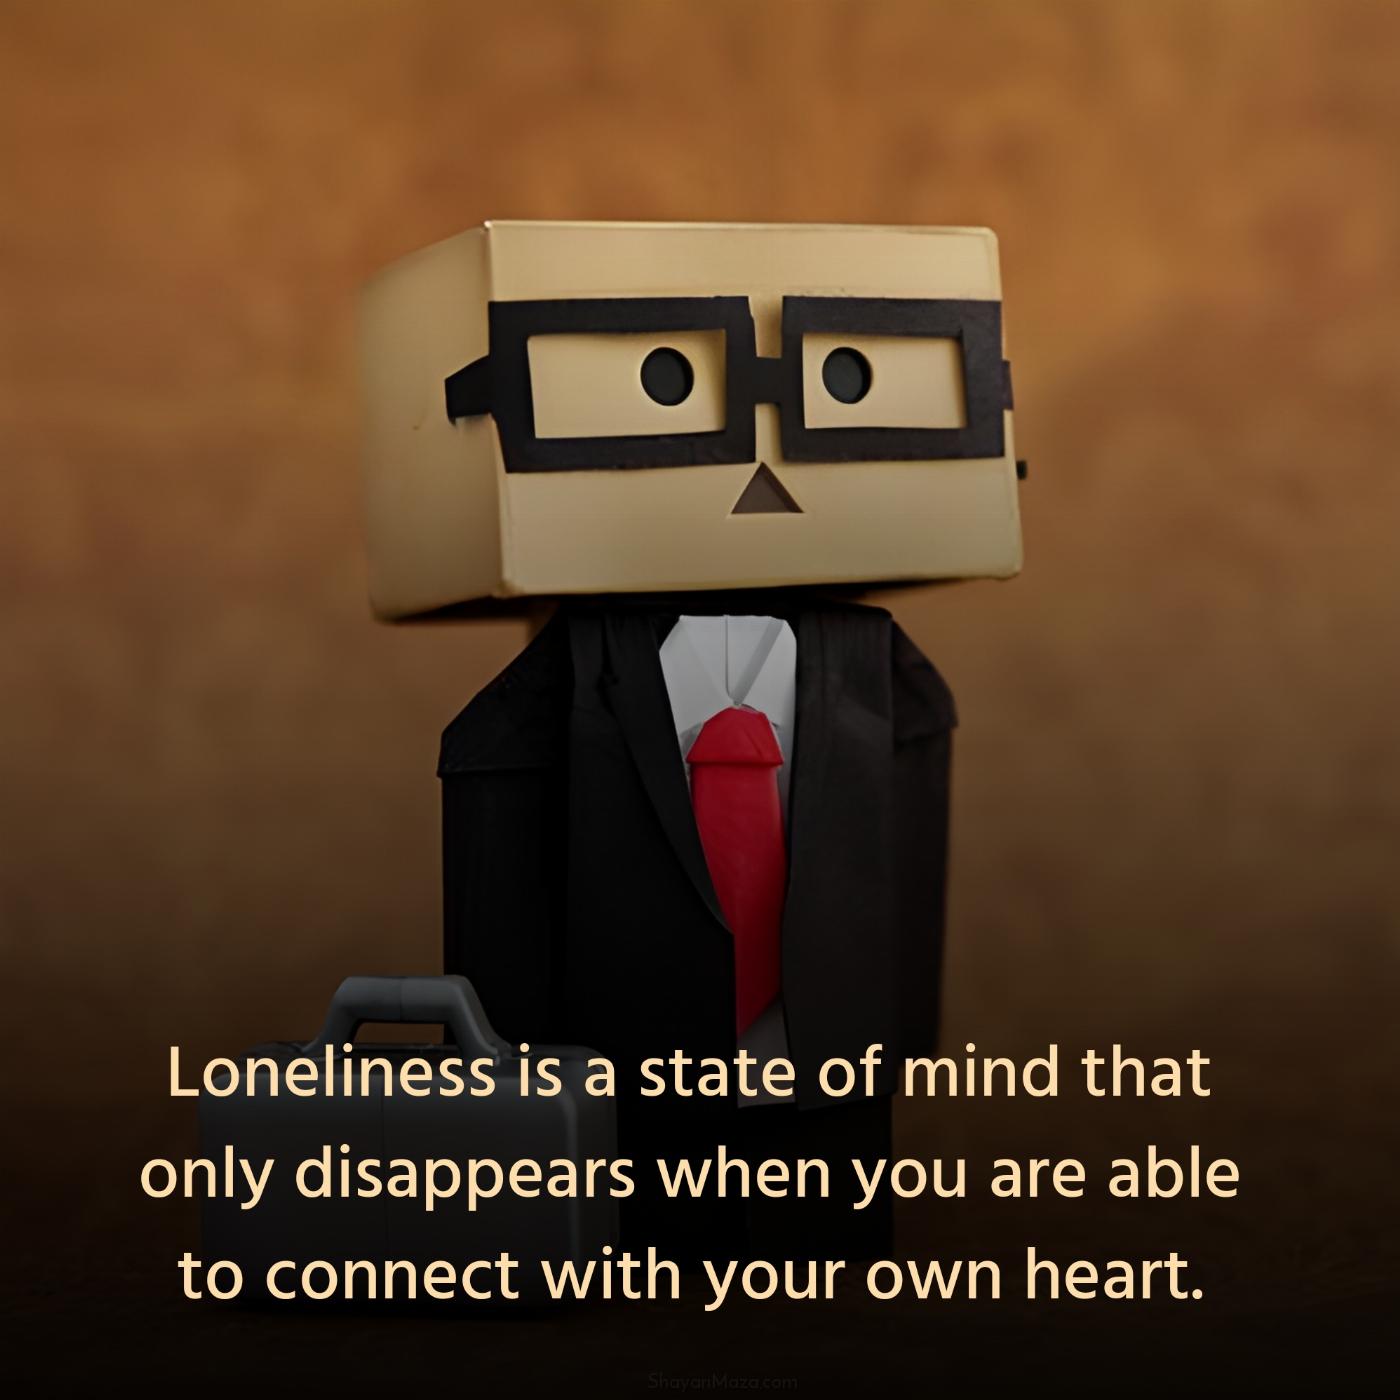 Loneliness is a state of mind that only disappears when you are able